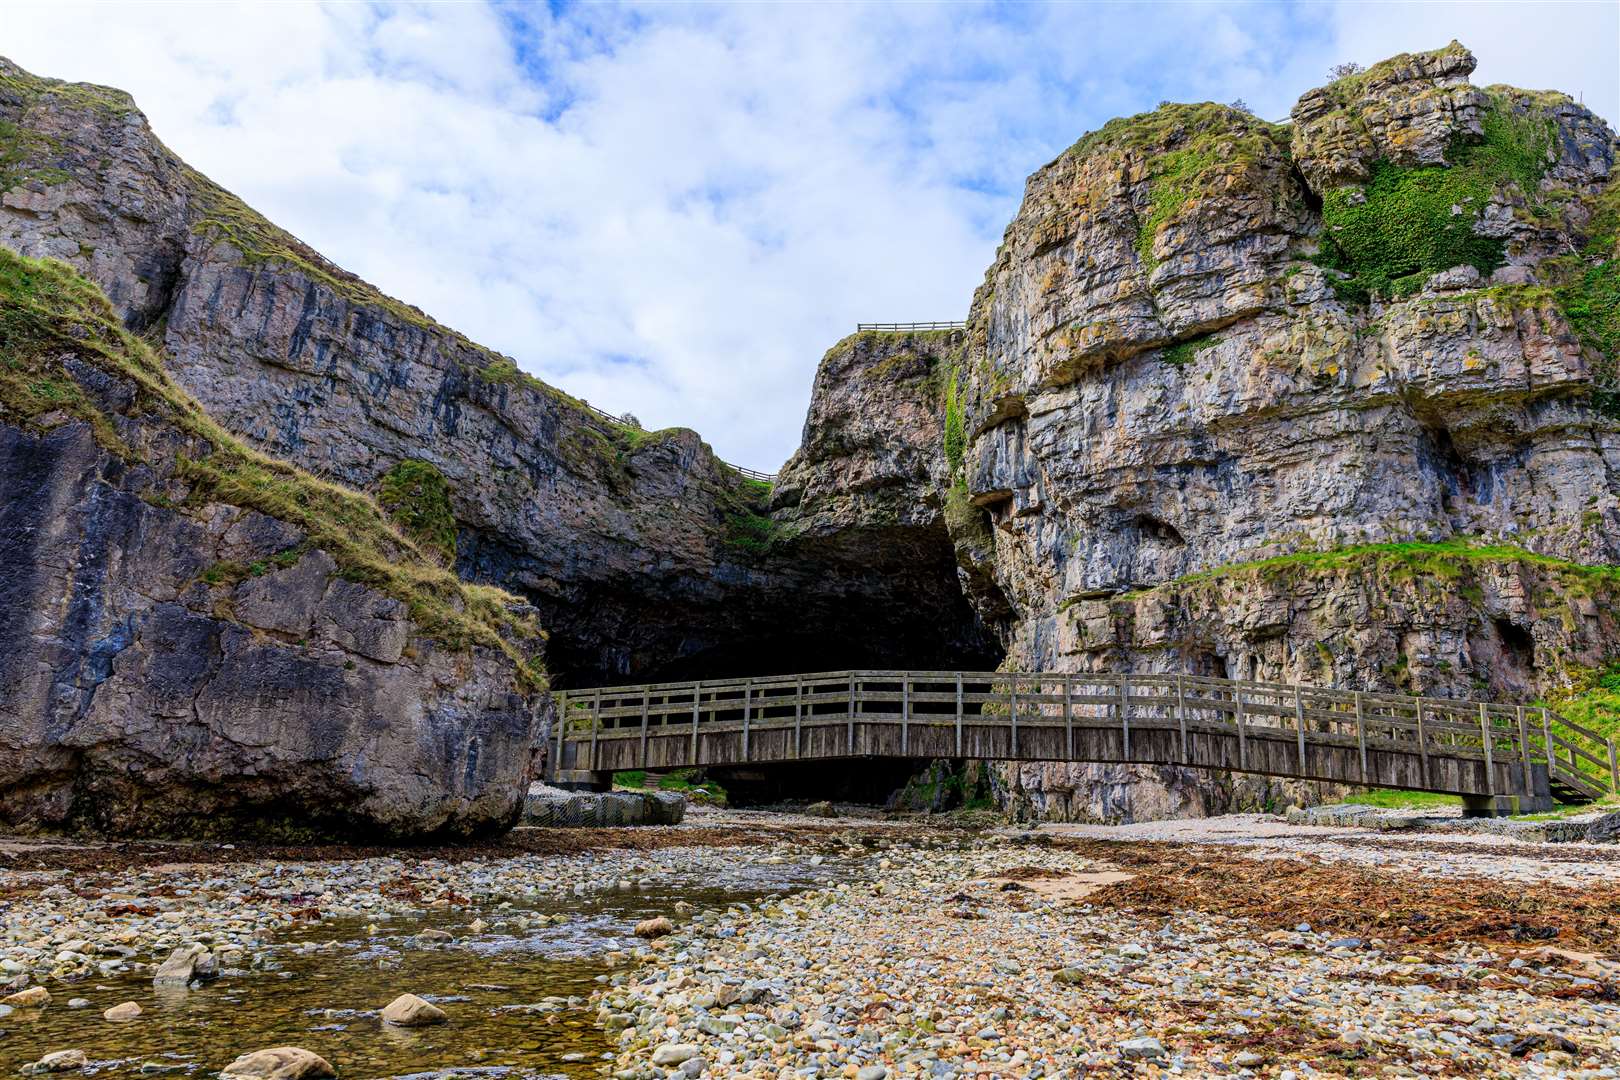 The entrance and the bridge over the stream at Smoo Cave. Smoo Cave is a combined coastal and freshwater cave in Durness, Sutherland, Scotland, UK